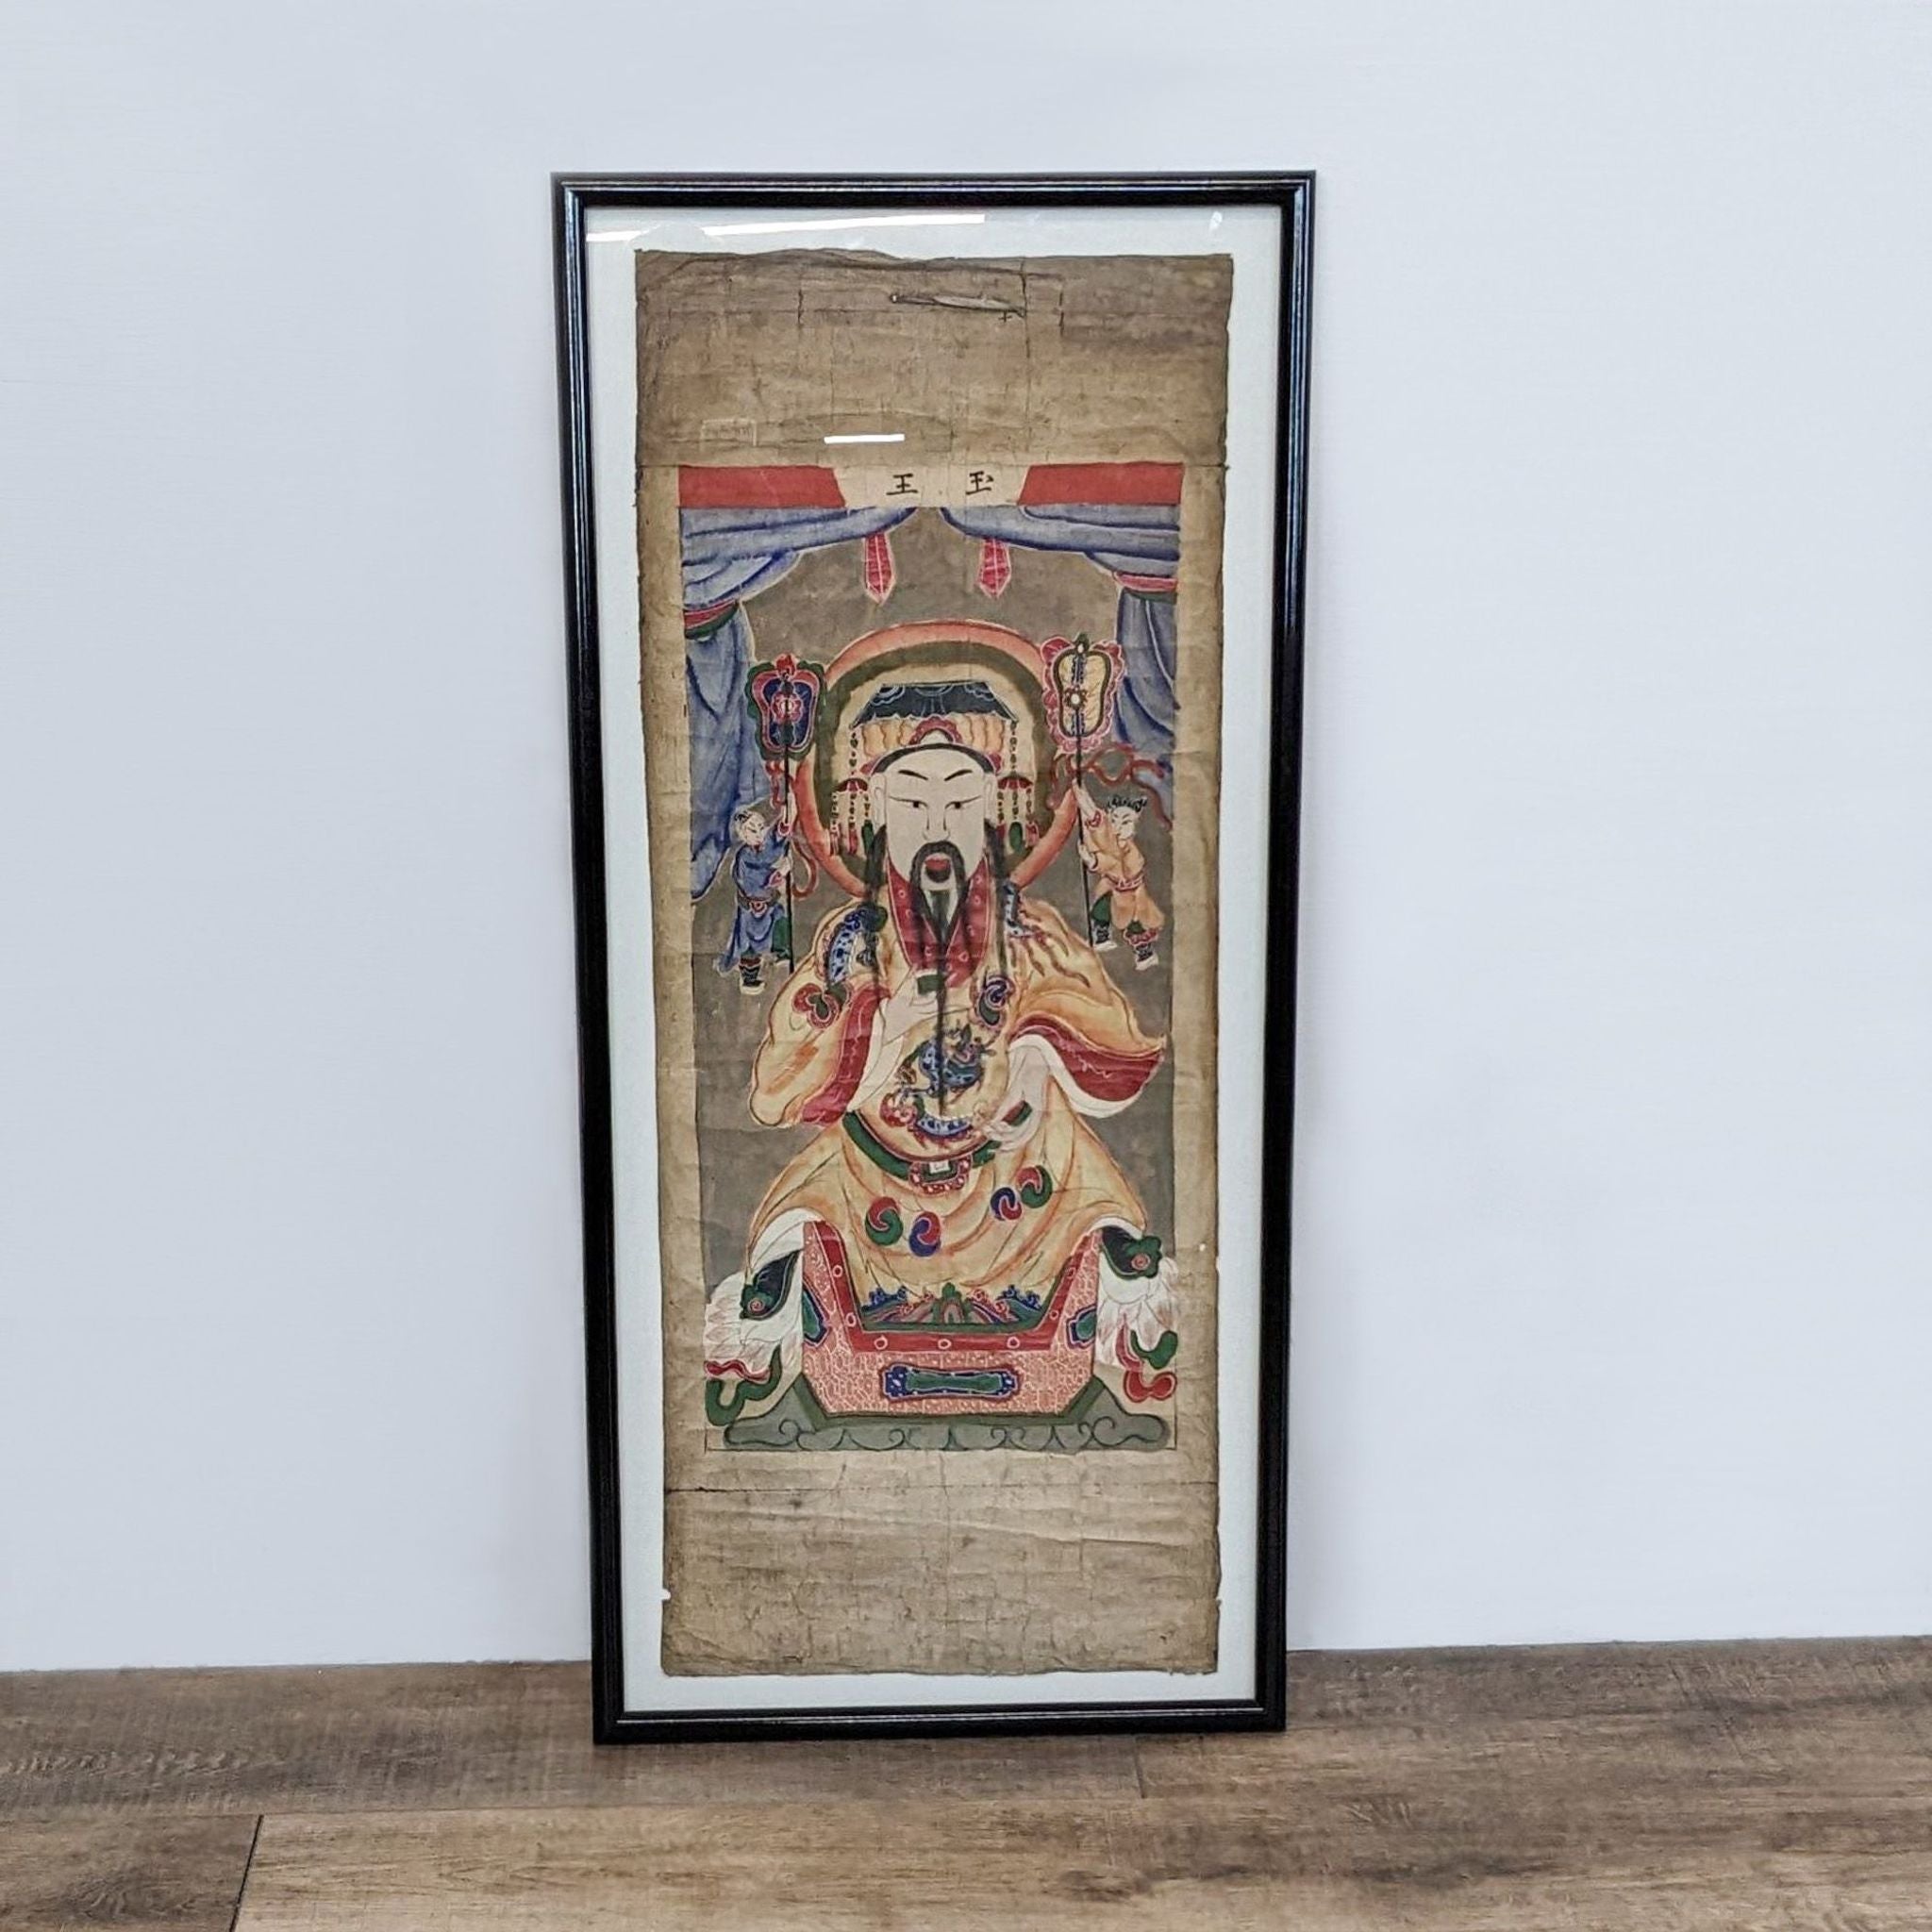 19th-century Chinese Taoist deity painting by Reperch, acrylic framed, displaying colorful traditional artwork.